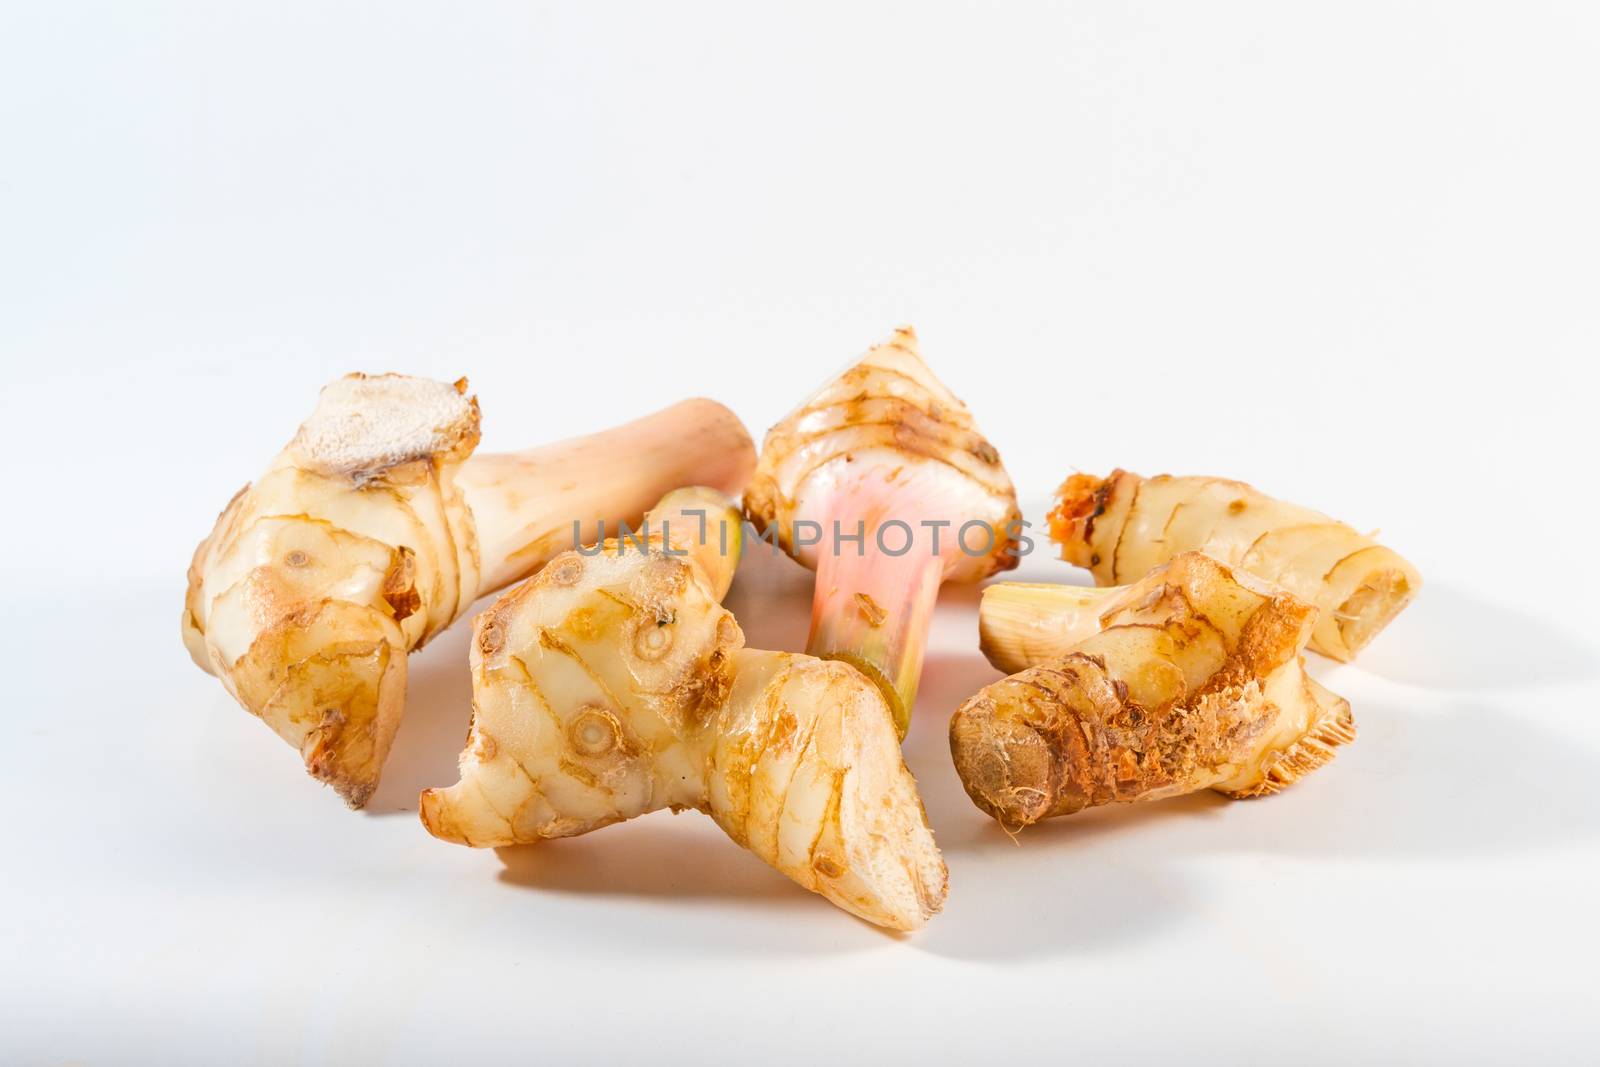 Galangal is an herb used in cooking in Thailand and Indonesia.